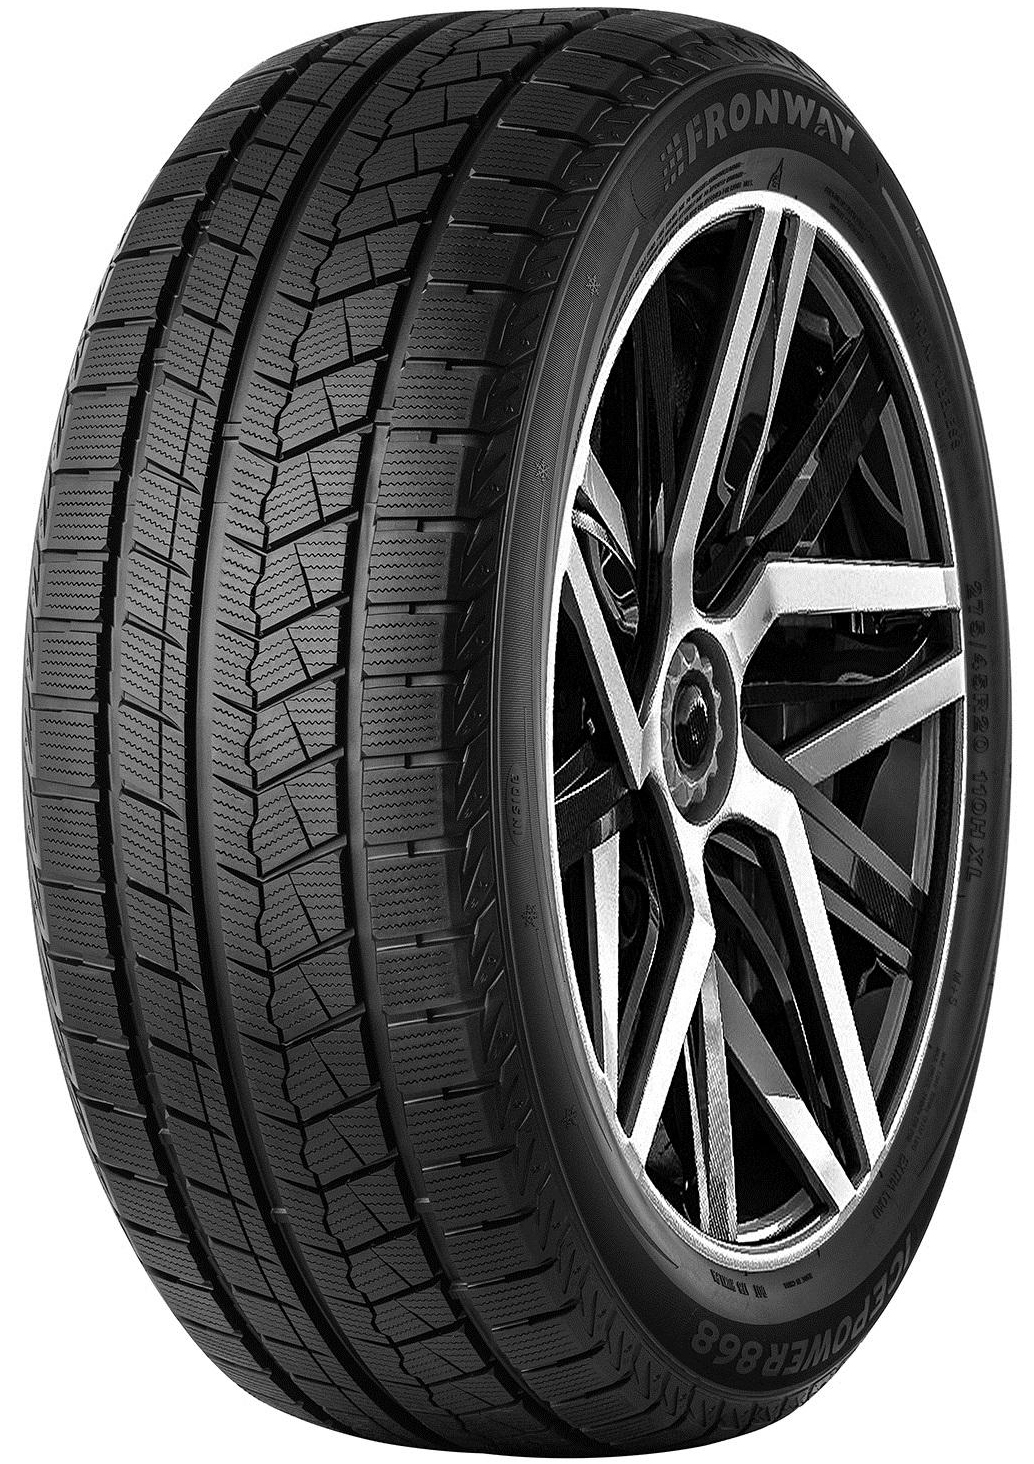    Fronway Icepower 868 235/60 R17 